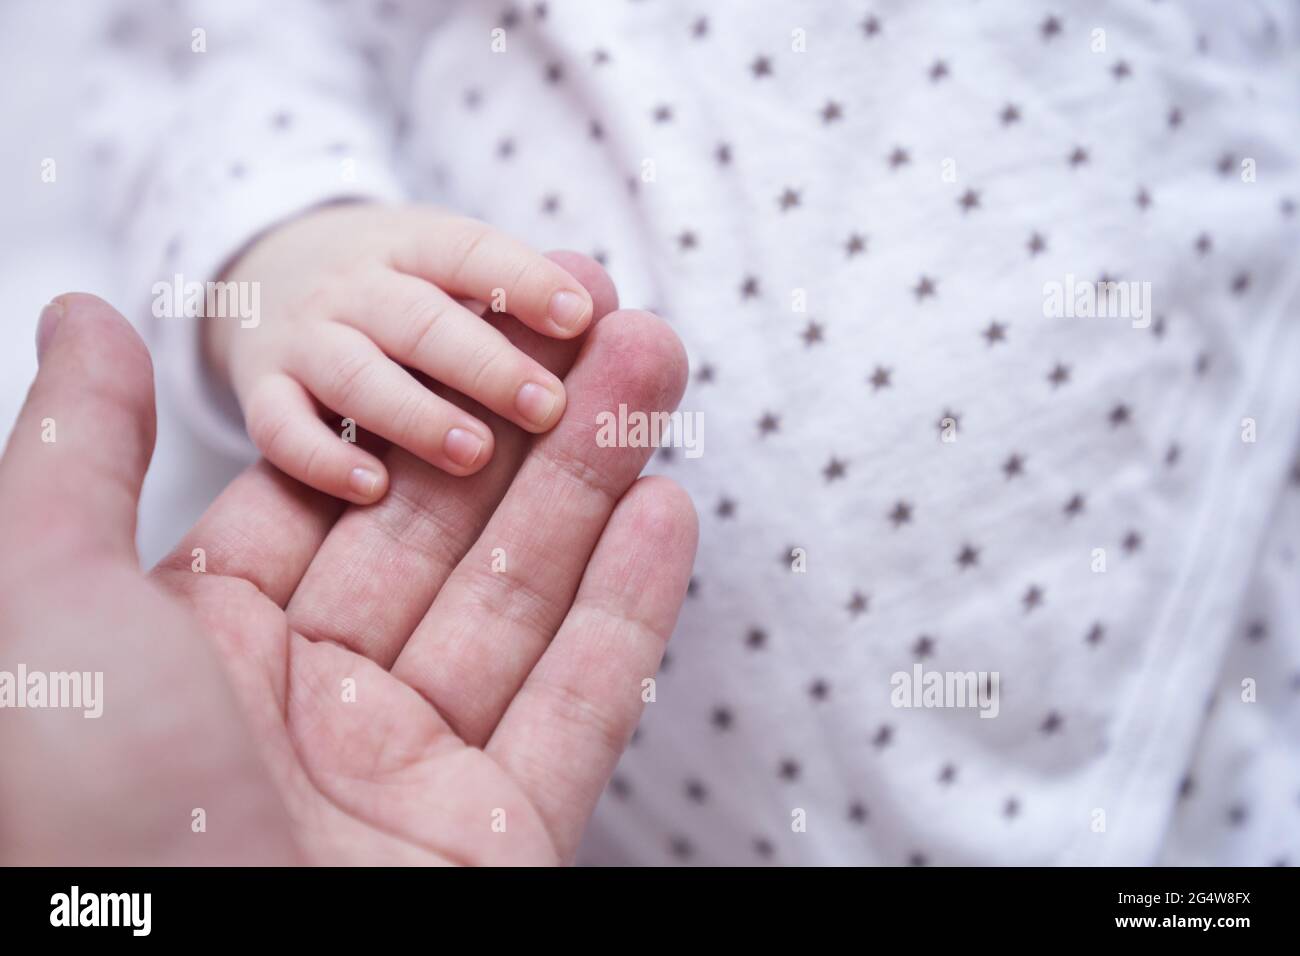 https://c8.alamy.com/comp/2G4W8FX/mothers-hand-holding-baby-hand-the-baby-is-one-month-old-cute-little-hand-with-small-fingers-concept-of-love-and-care-background-high-quality-photo-2G4W8FX.jpg